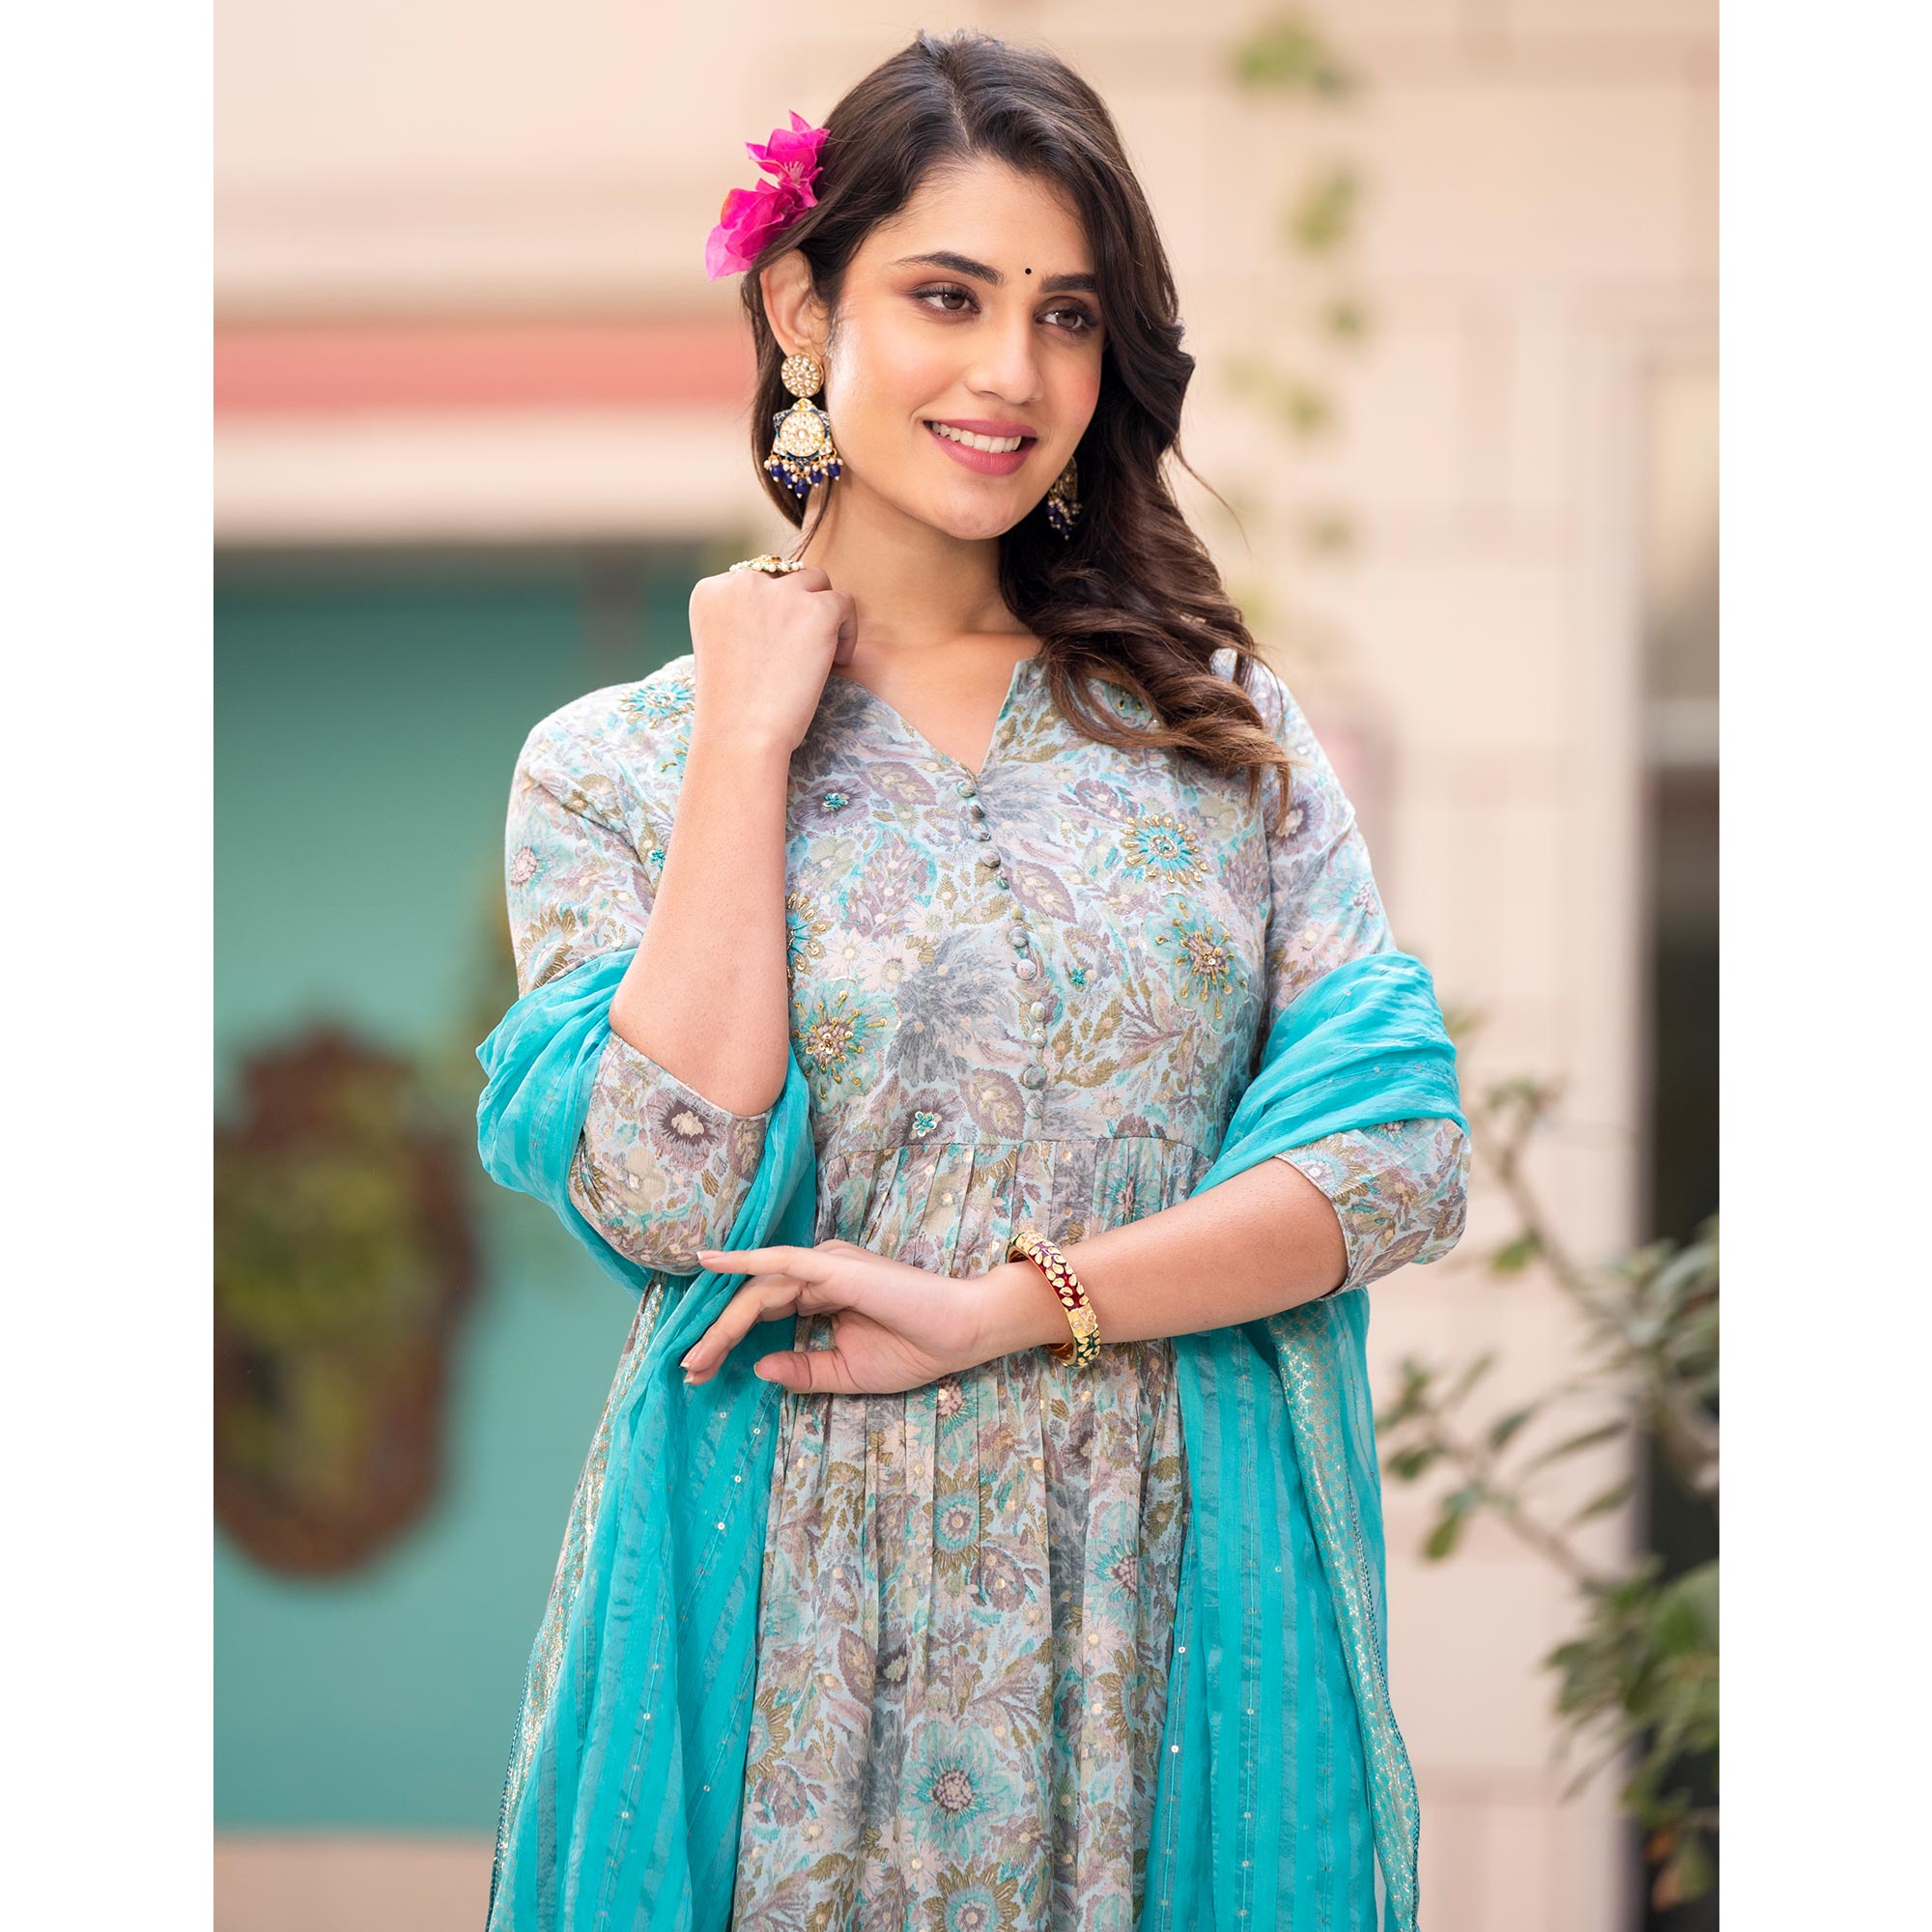 Turquoise Naira Cut Pure Cotton Suit with Handcrafted & Foil Print